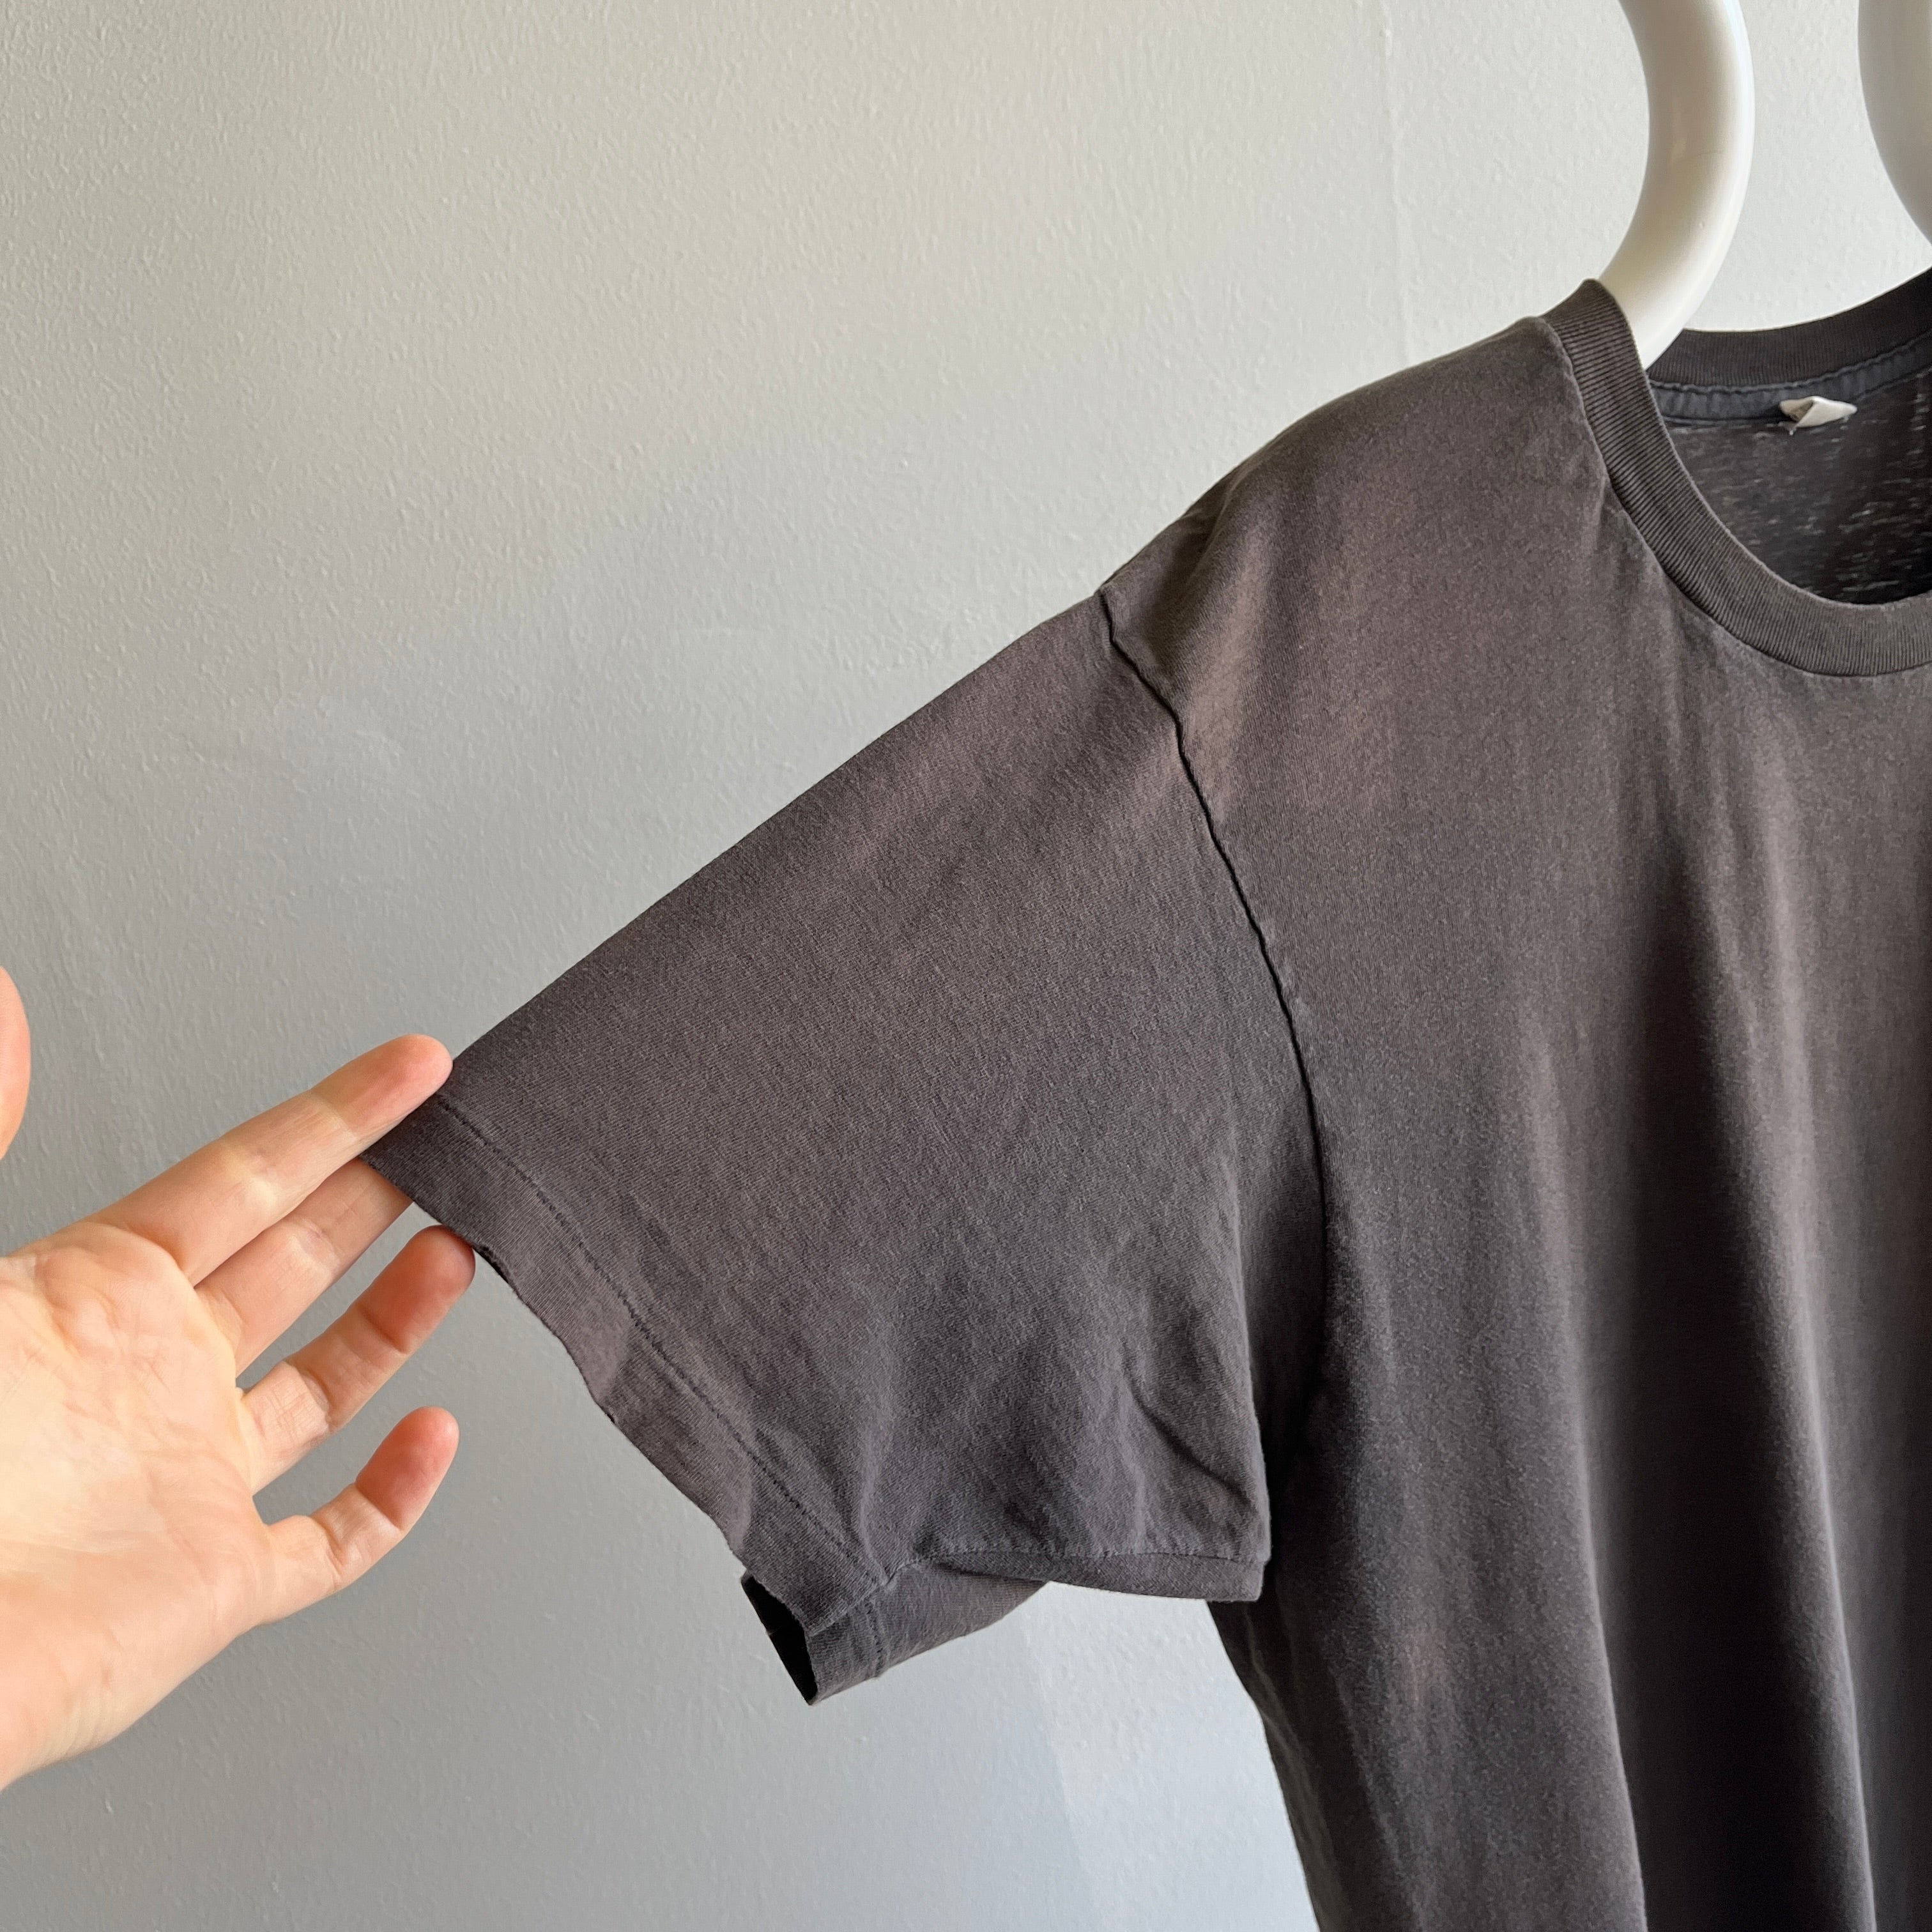 1990s Very Faded and Long Blank Black/Brown Pocket T-Shirt by Jockey